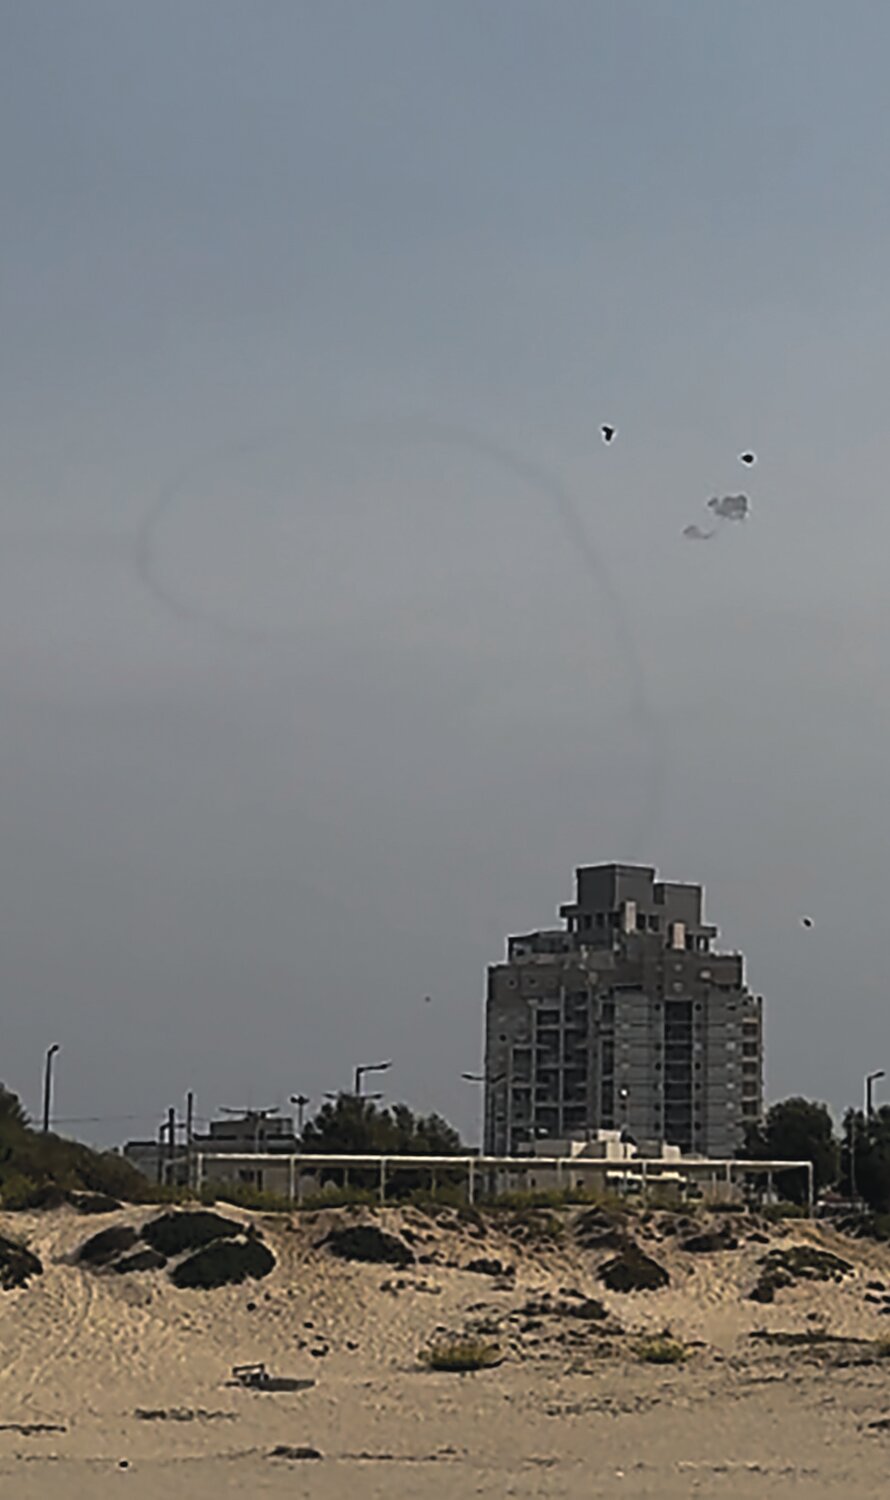 Rockets bursting in air: Israel’s Iron Dome missile defense system shoots down a rocket above Ashkelon, Israel, that was launched by Hamas from the Gaza Strip on Oct. 28.